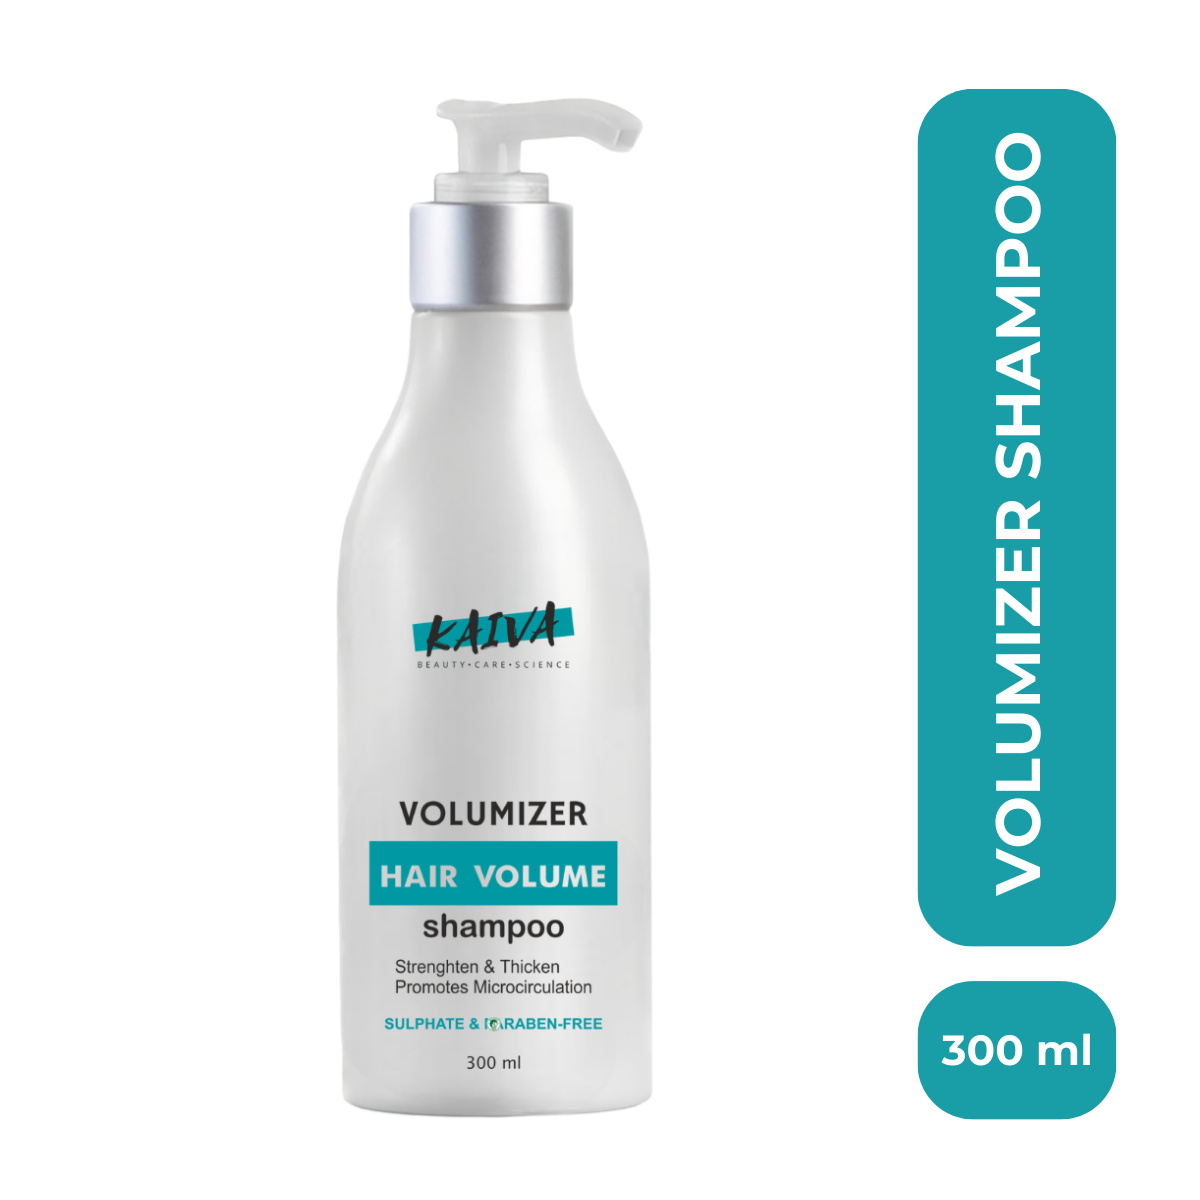 Volumizer Shampoo for Hair Strengthening and Volume | Sulfate & Paraben Free – 300 ml